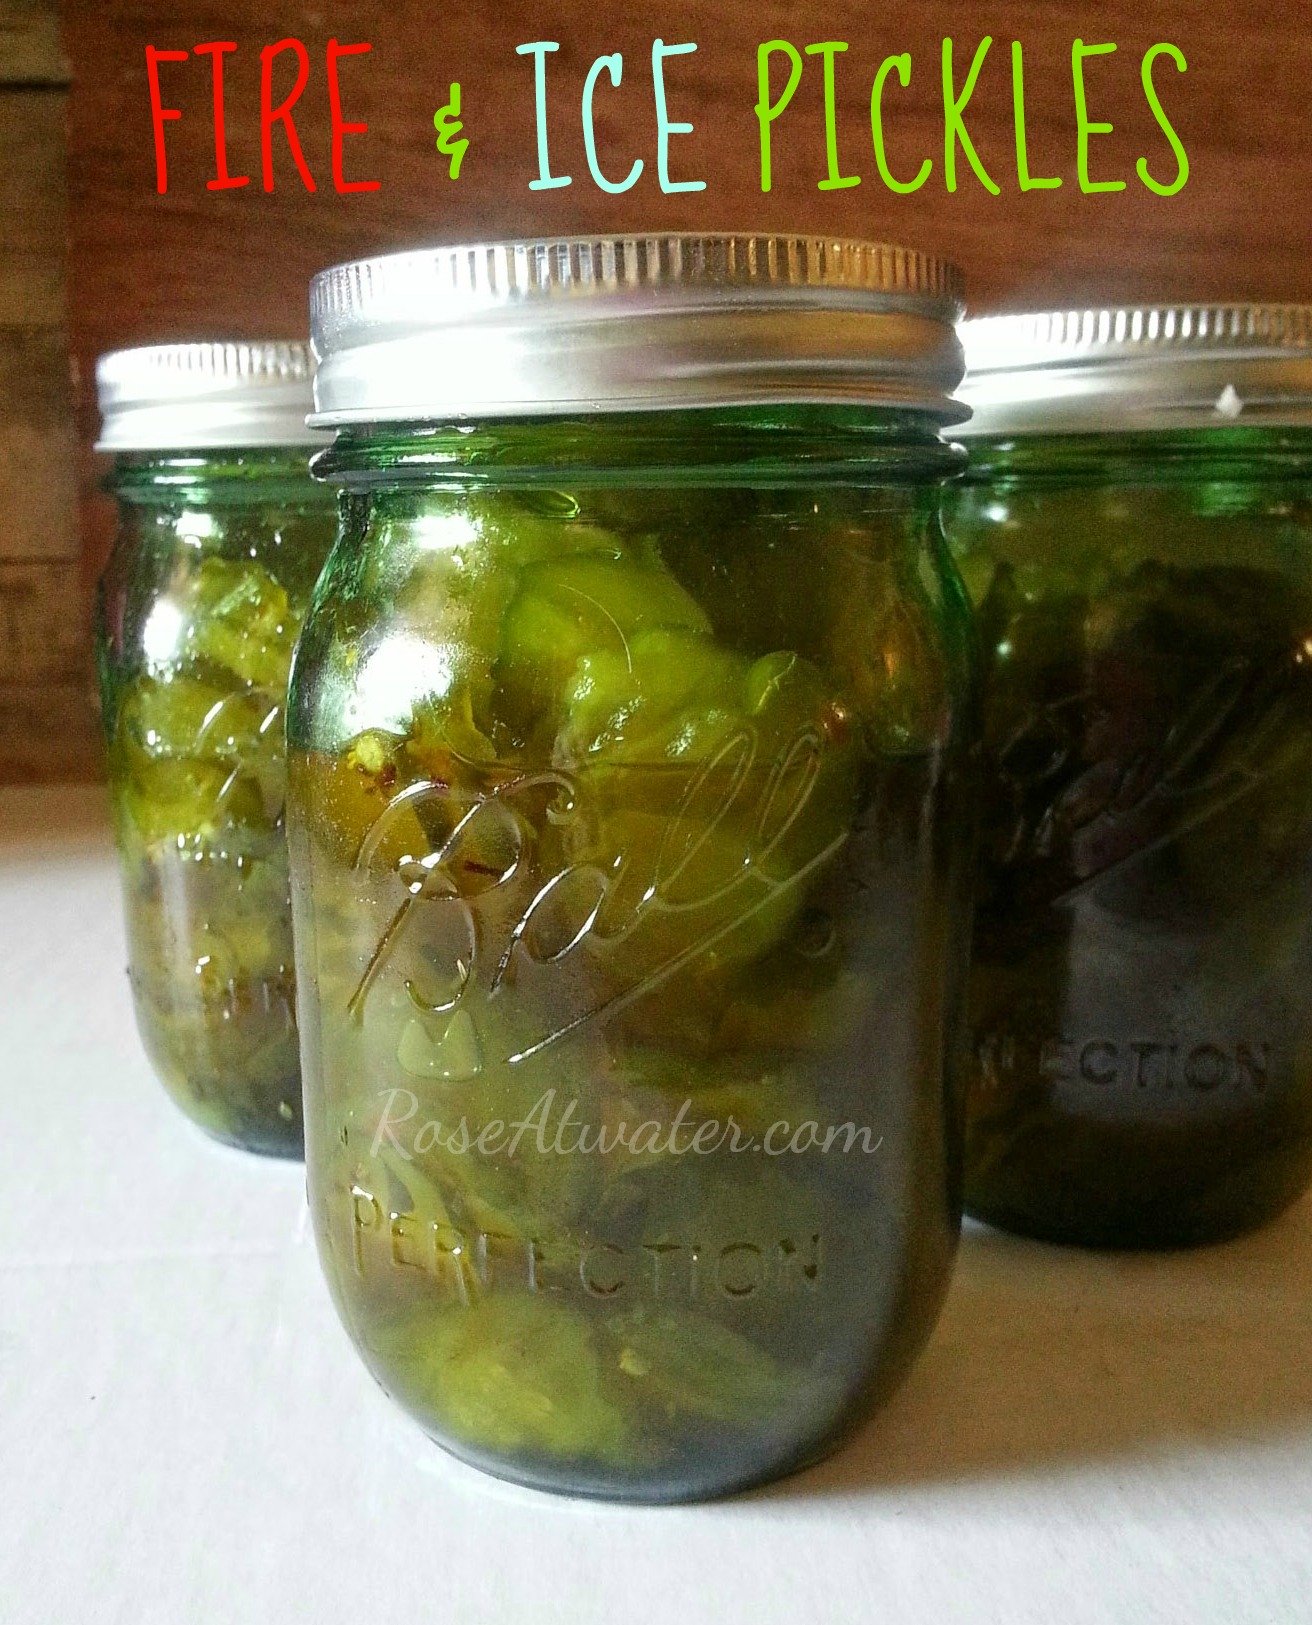 Fire & Ice Pickles